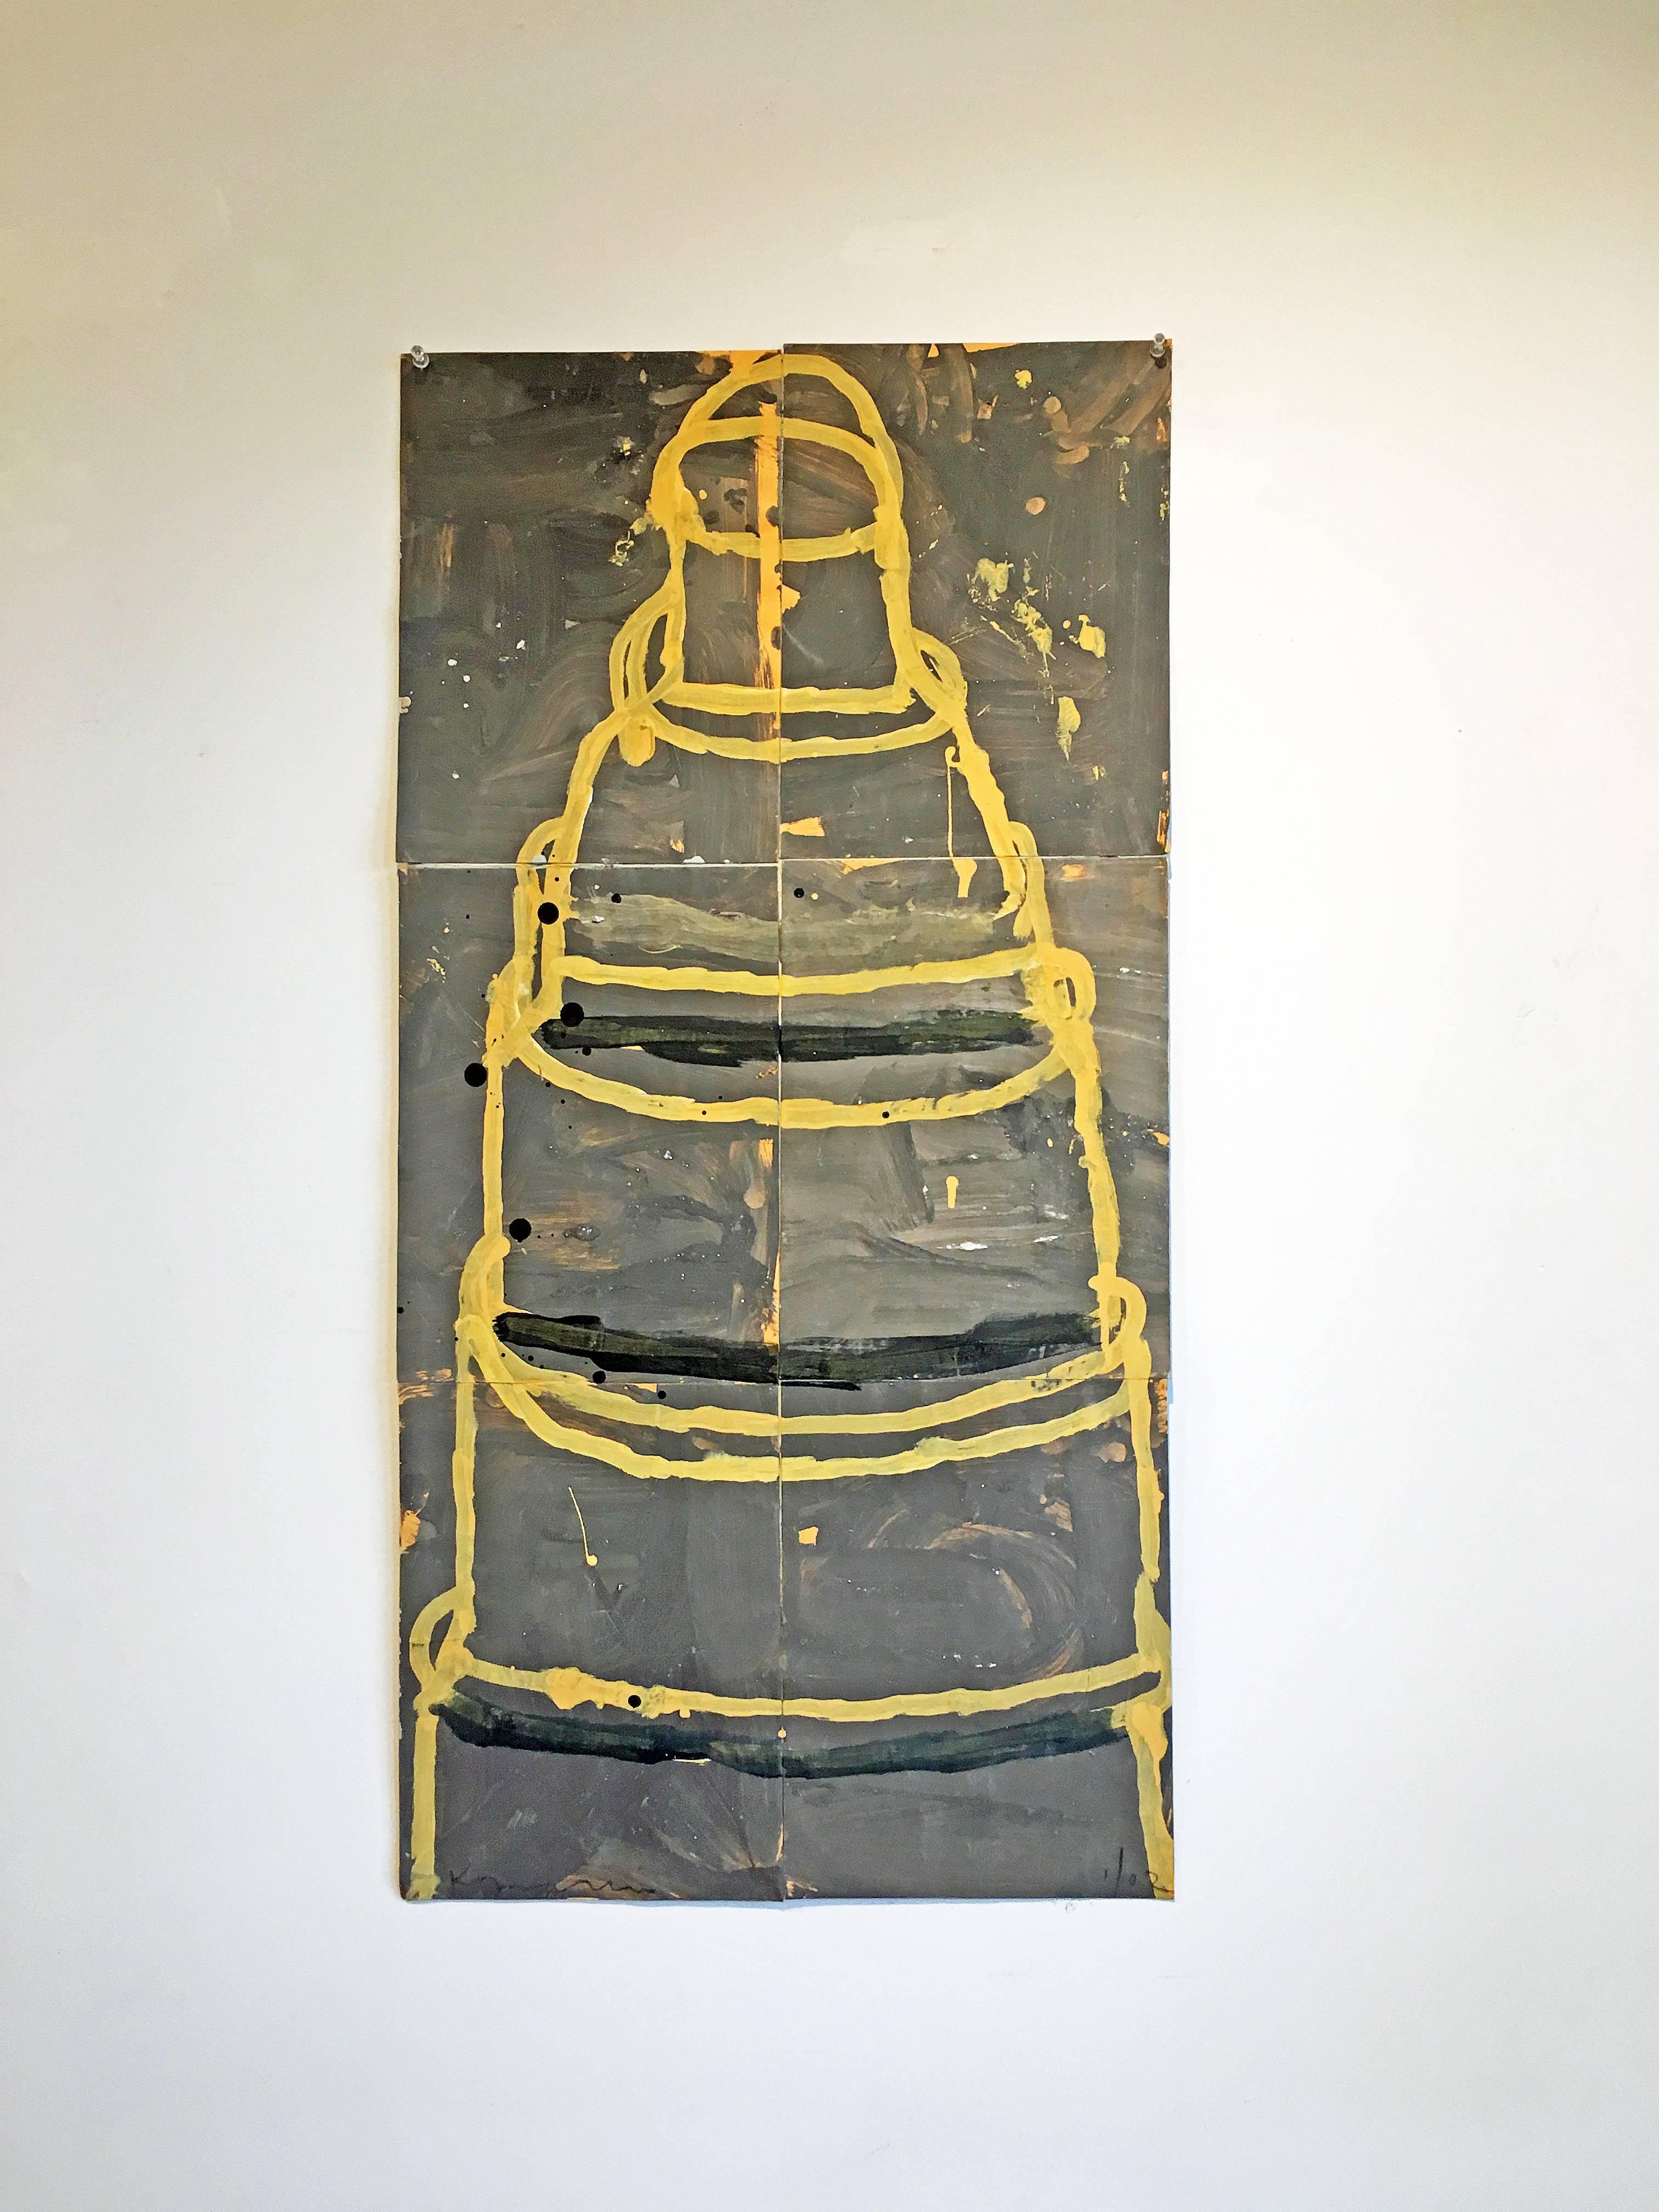 'Cake (Yellow on Grey)' by contemporary artist, Gary Komarin, 2002. Acrylic on envelopes, 36.25 x 18 inches. This faux naive style painting of a 6-tier cake is outlined in yellow on a grey background. 

In his delightful, naively drawn Cakes